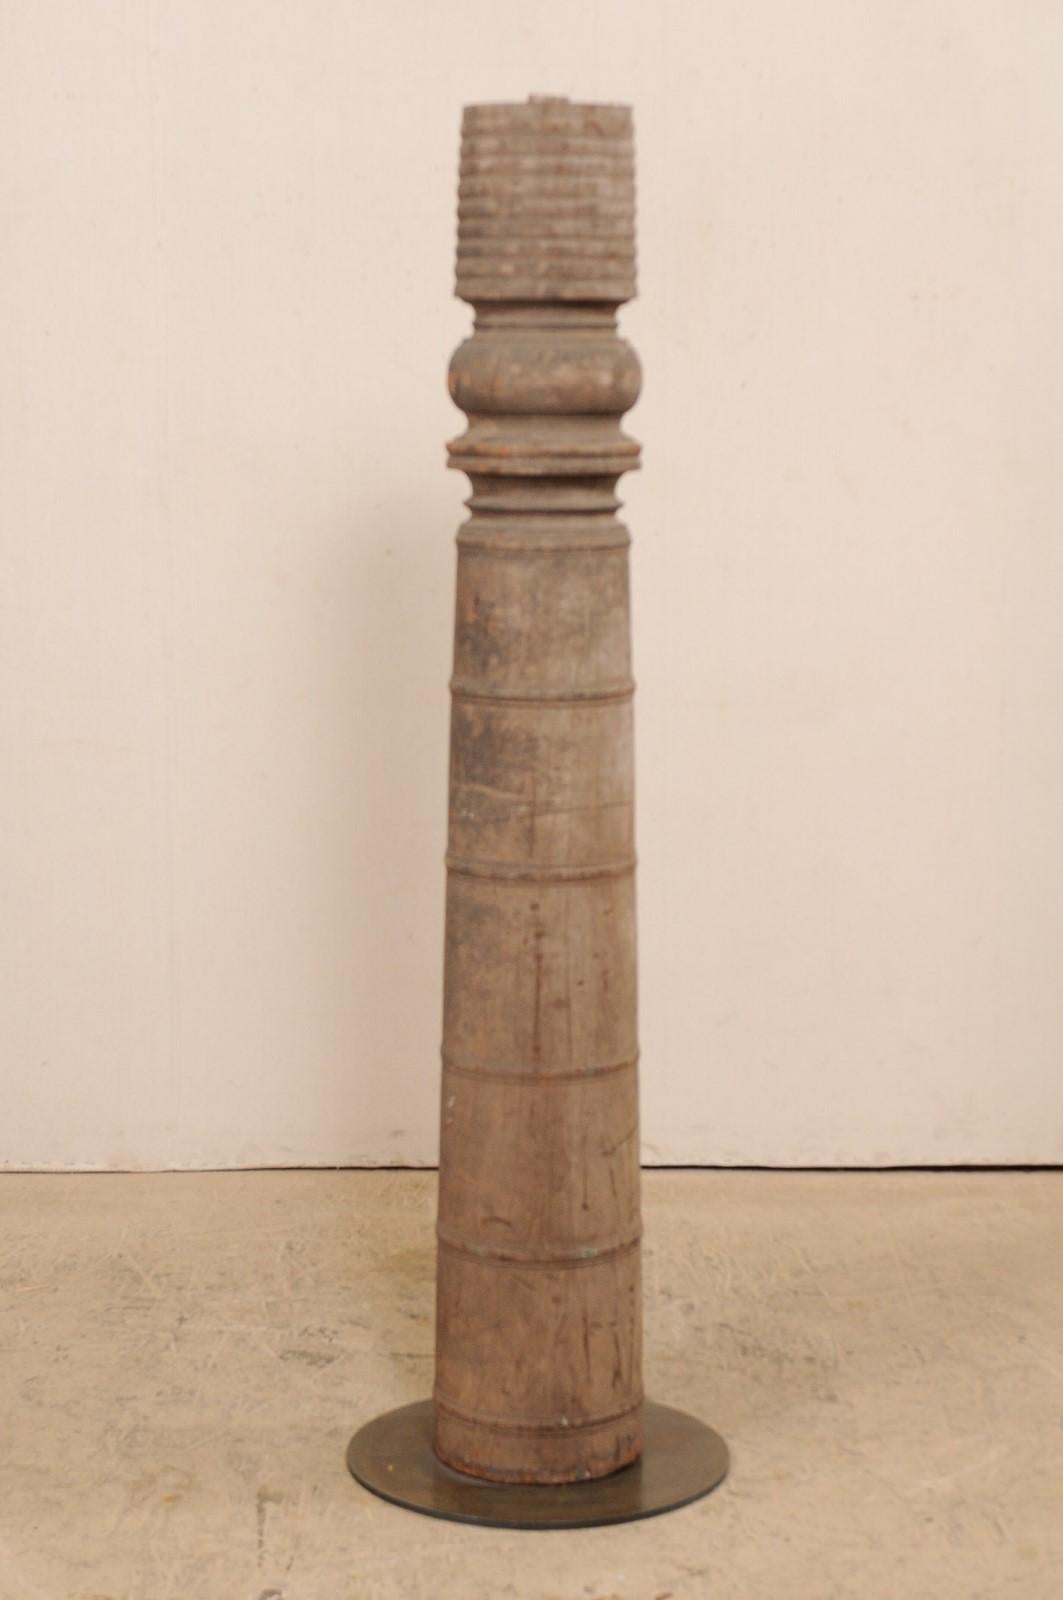 Carved 19th Century British Colonial Architectural Column on Stand